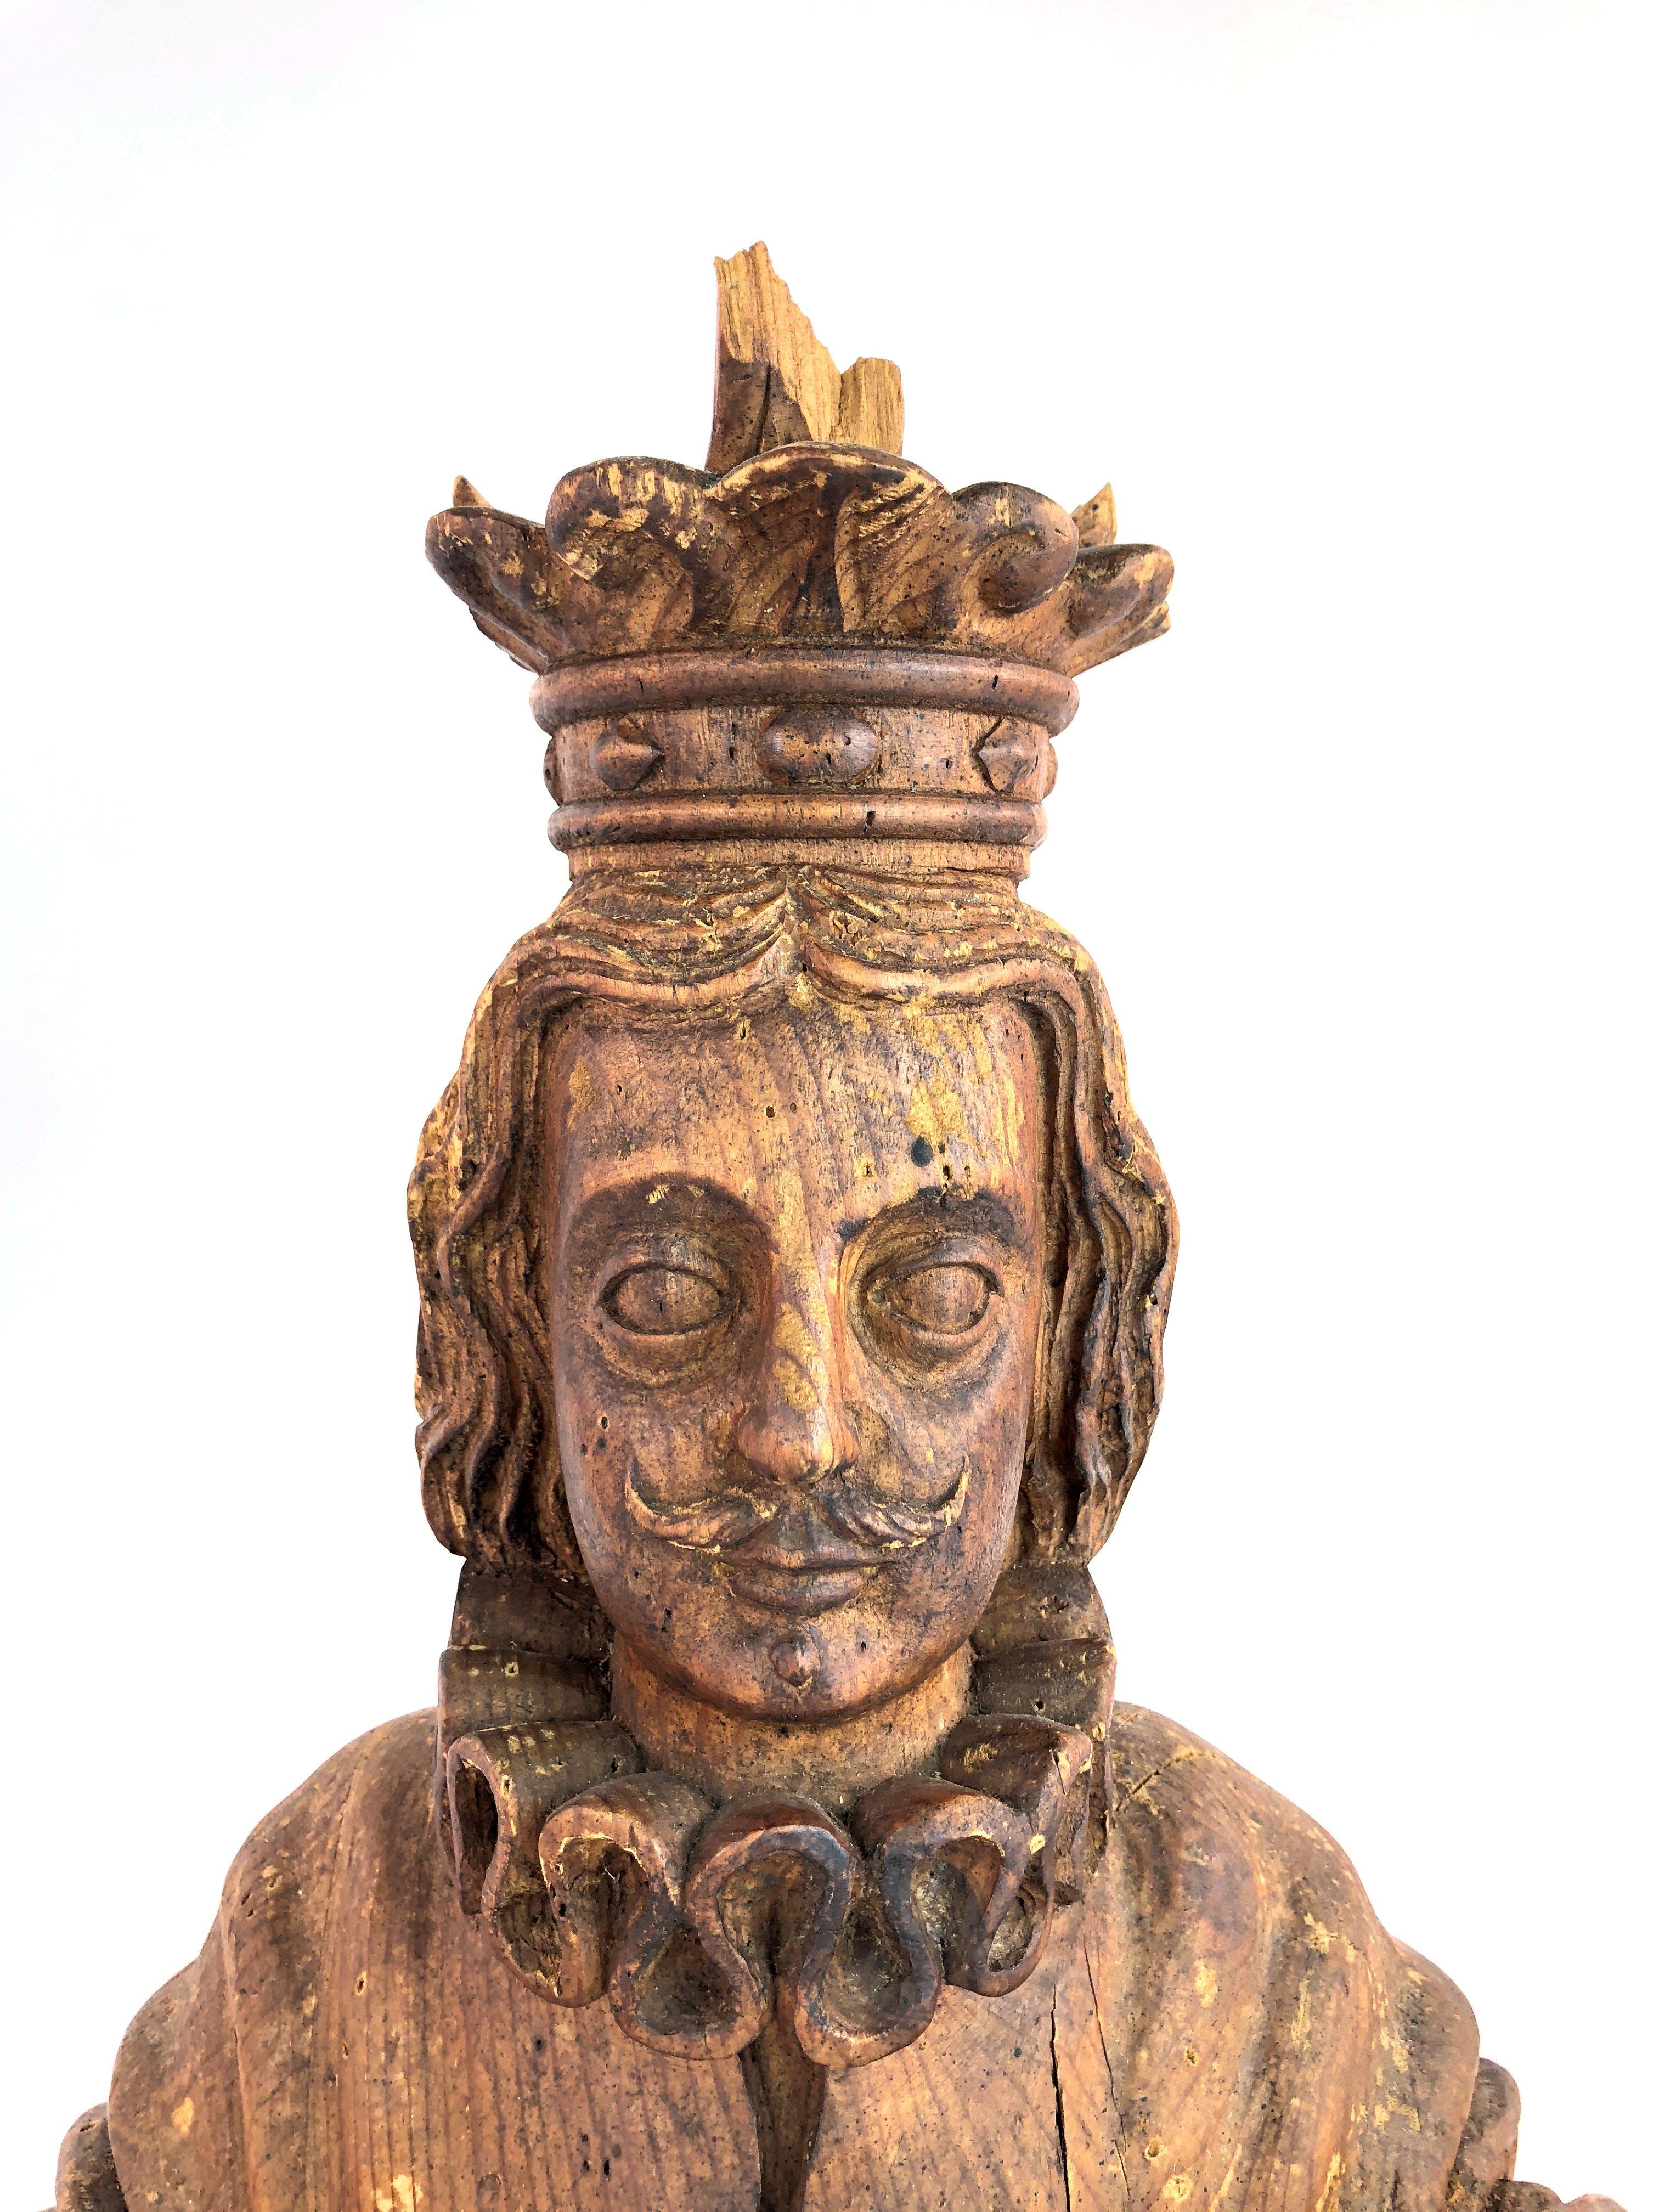 Intricately Carved French Royalty King & Queen Busts Sculptures